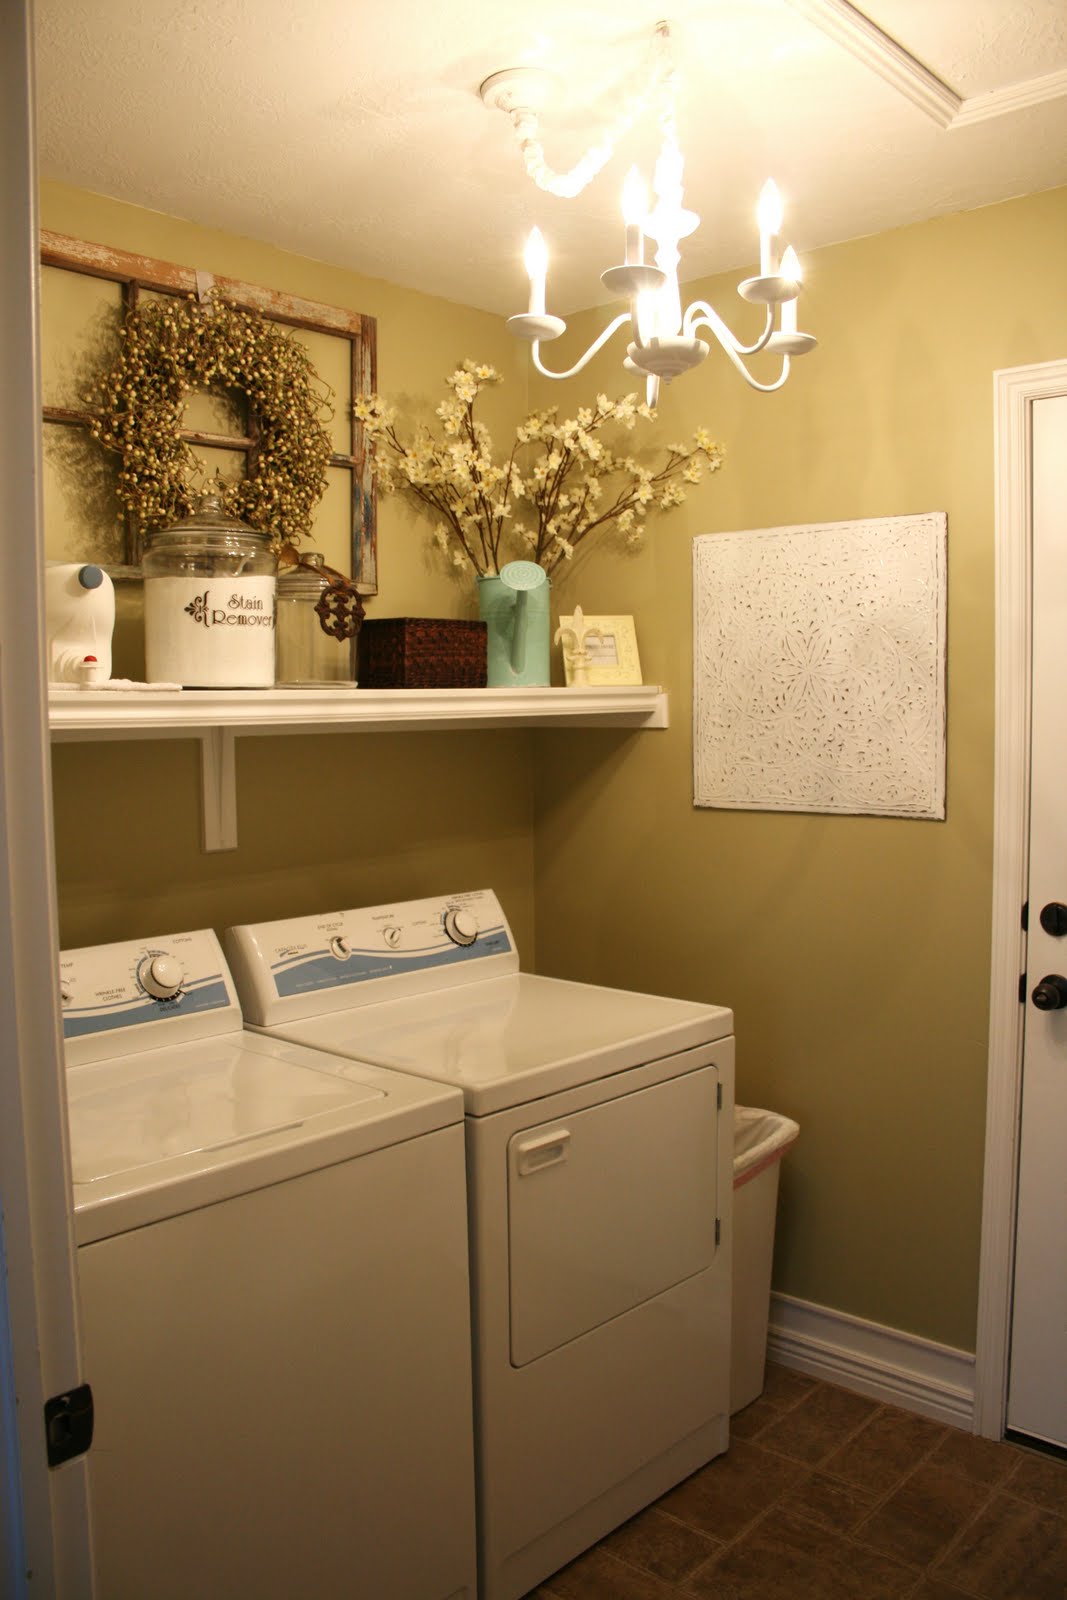 Sassy Sites!: Home Tour the laundry room